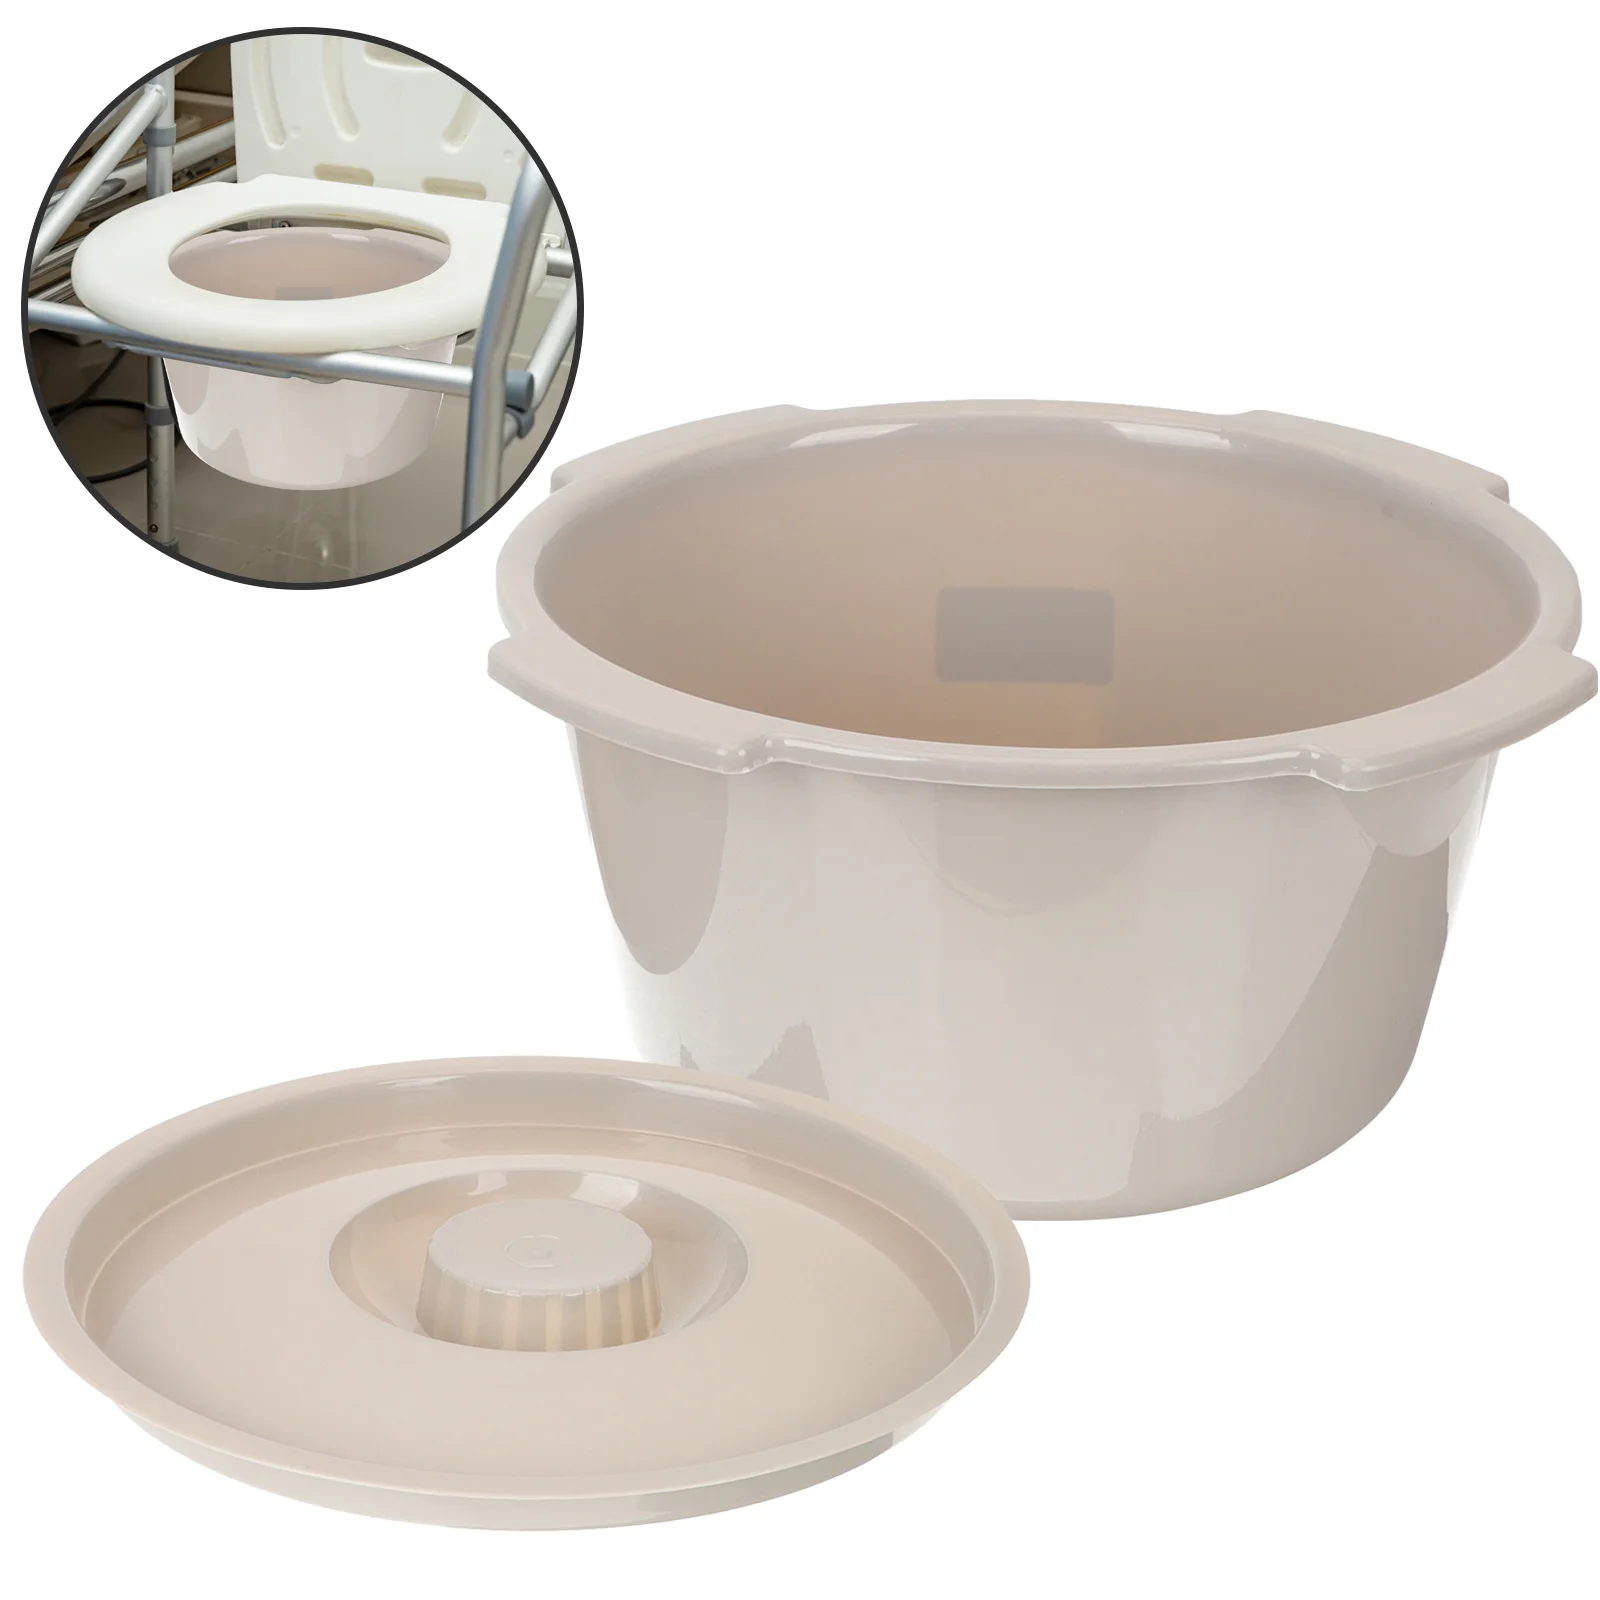 

Commode Chair Urine Bedpan Plastic Chamber Pot Outdoor Chairs Spittoon with Lid Household Pp Miss Portable Potty for Adults